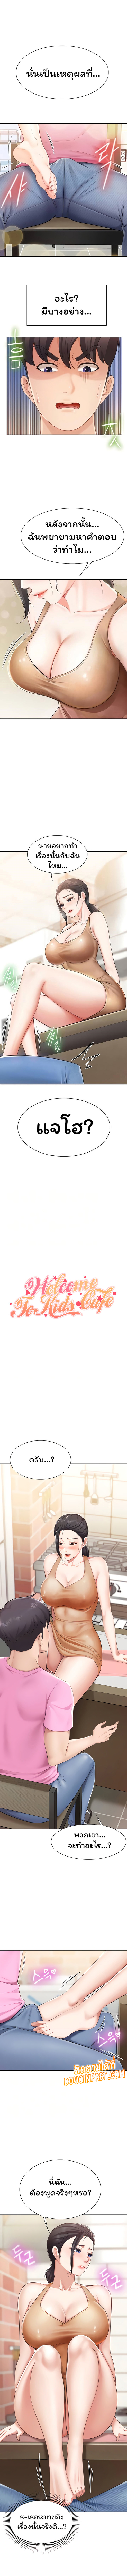 Welcome To Kids Cafe